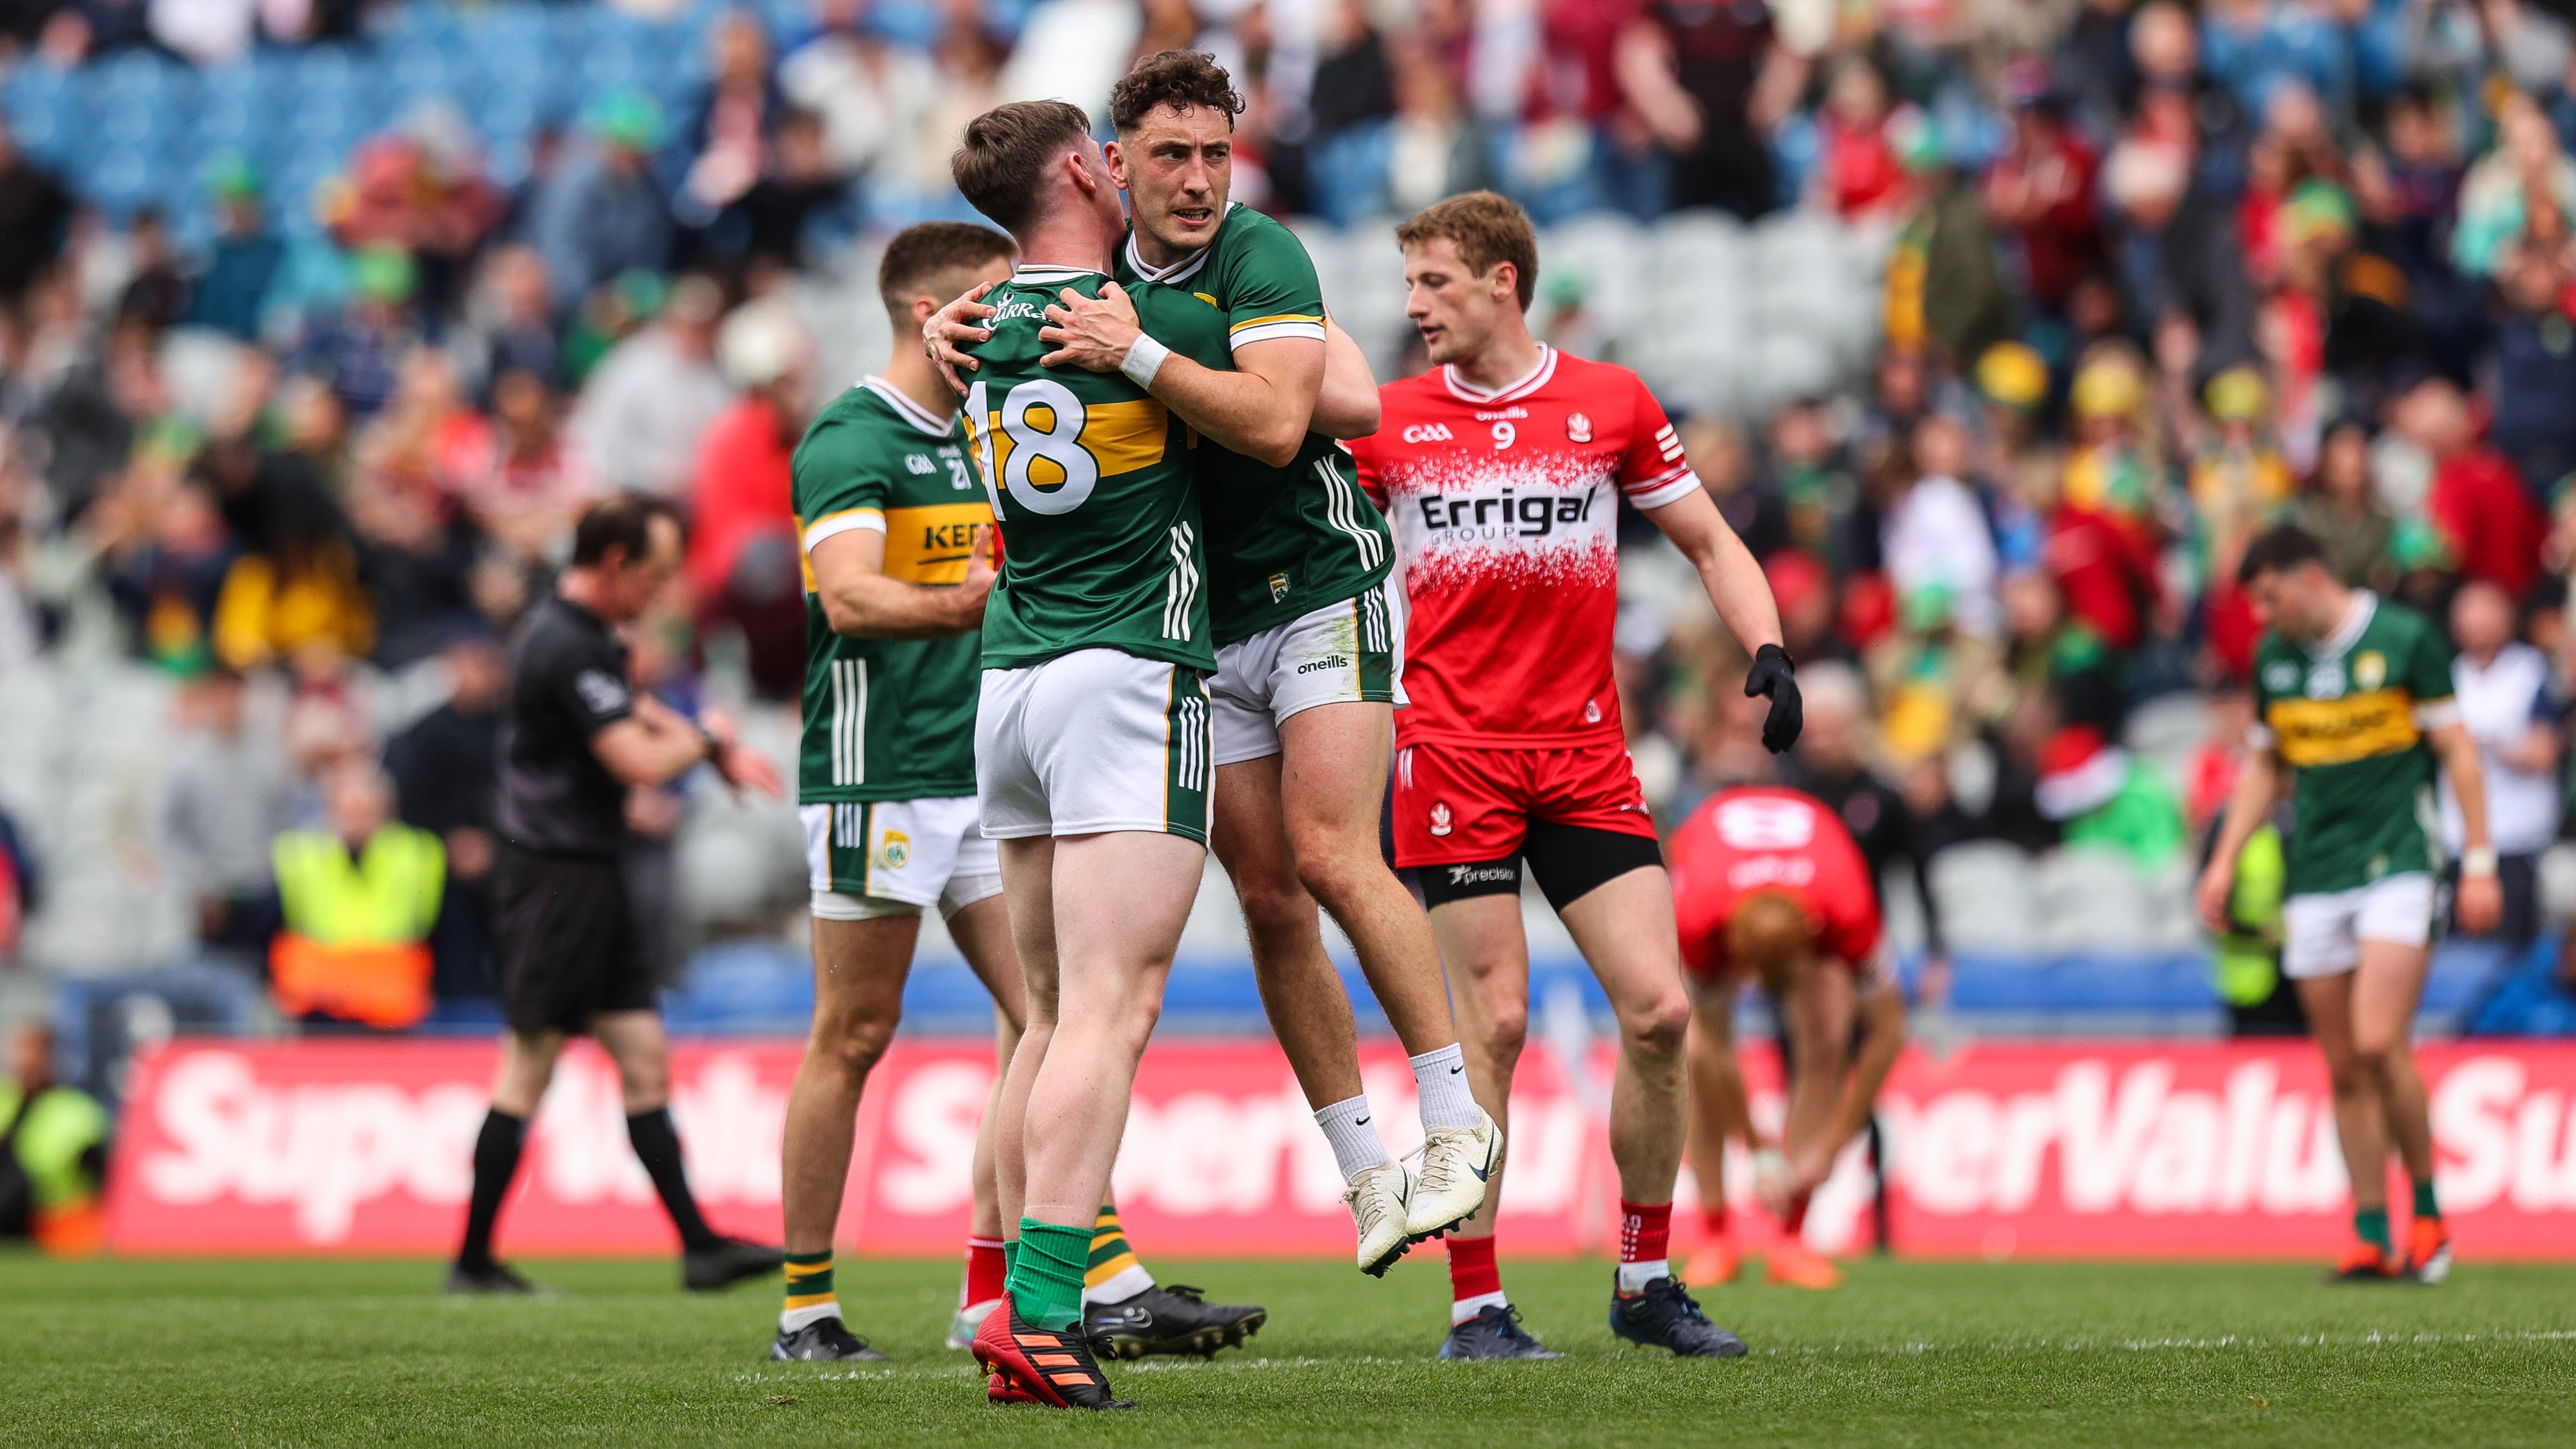 Kerry’s Cillian Burke and Paudie Clifford celebrate after the game. Picture: INPHO/Ryan Byrne